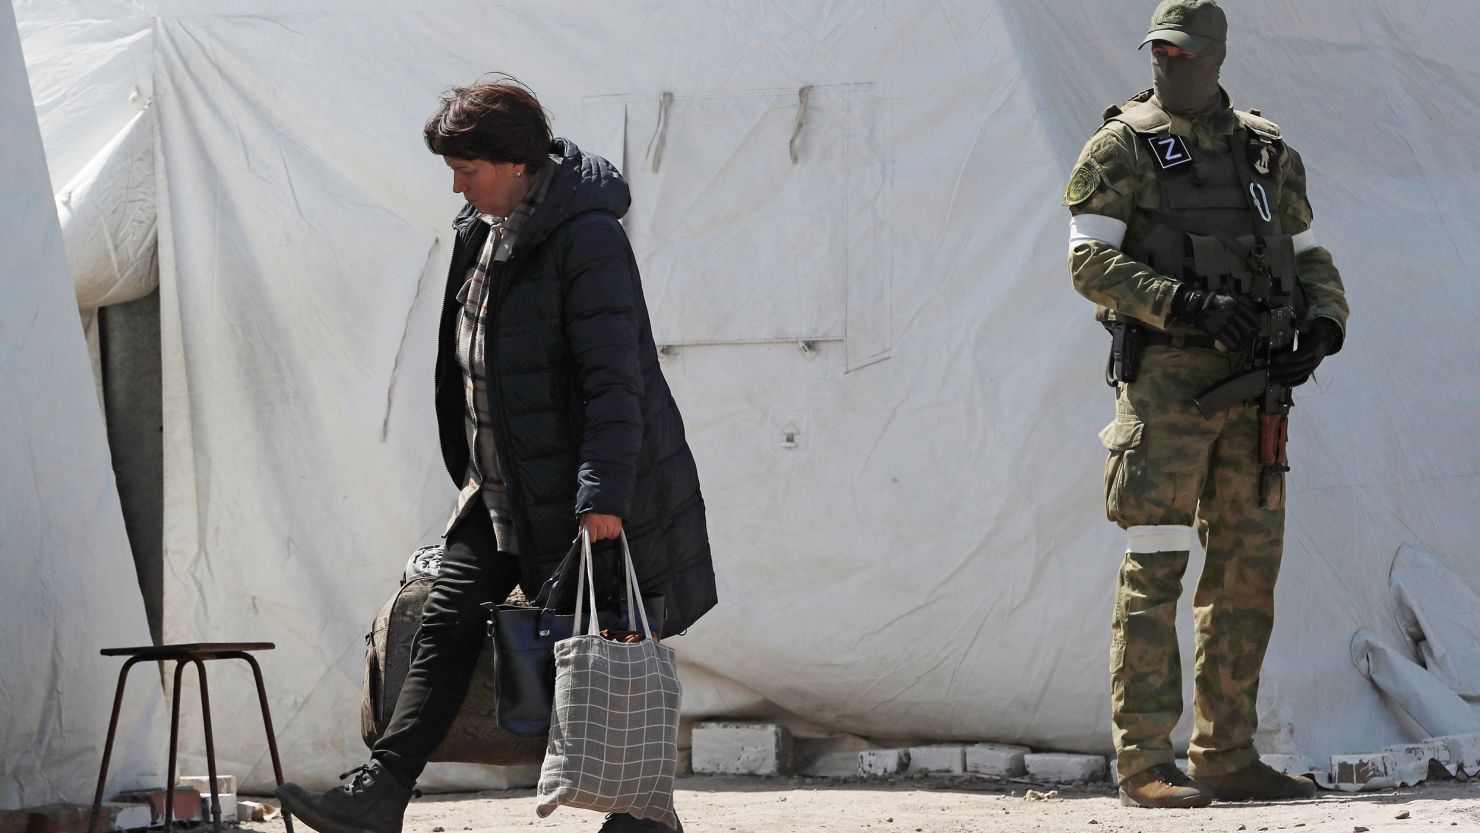 A woman carries bags as evacuees, including civilians who left the area near Azovstal steel plant in Mariupol, arrive at a temporary accommodation center in the village of Bezimenne in the Donetsk Region, Ukraine May 1, 2022. 